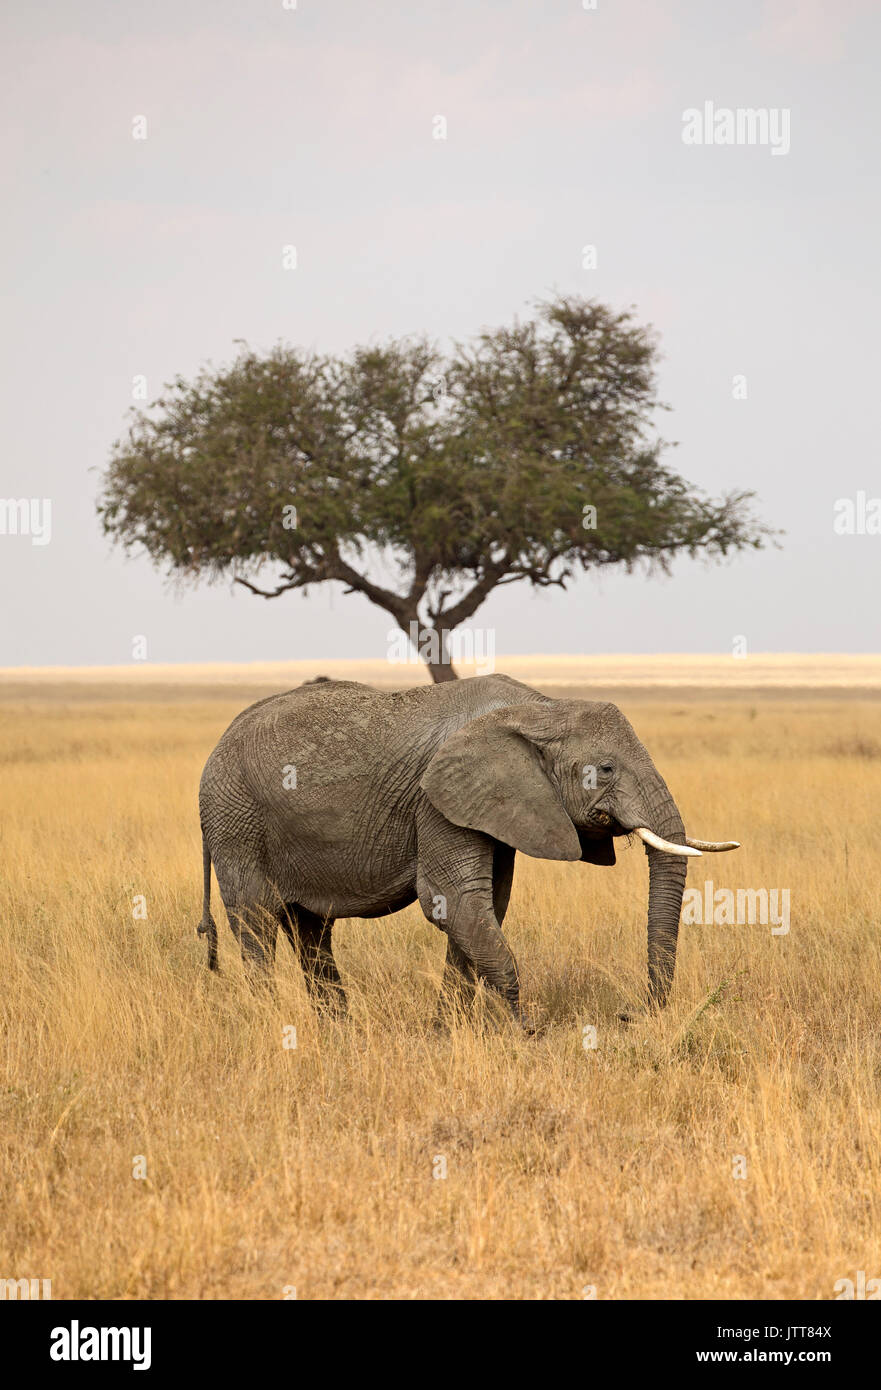 Elephant and tree from east Africa Stock Photo